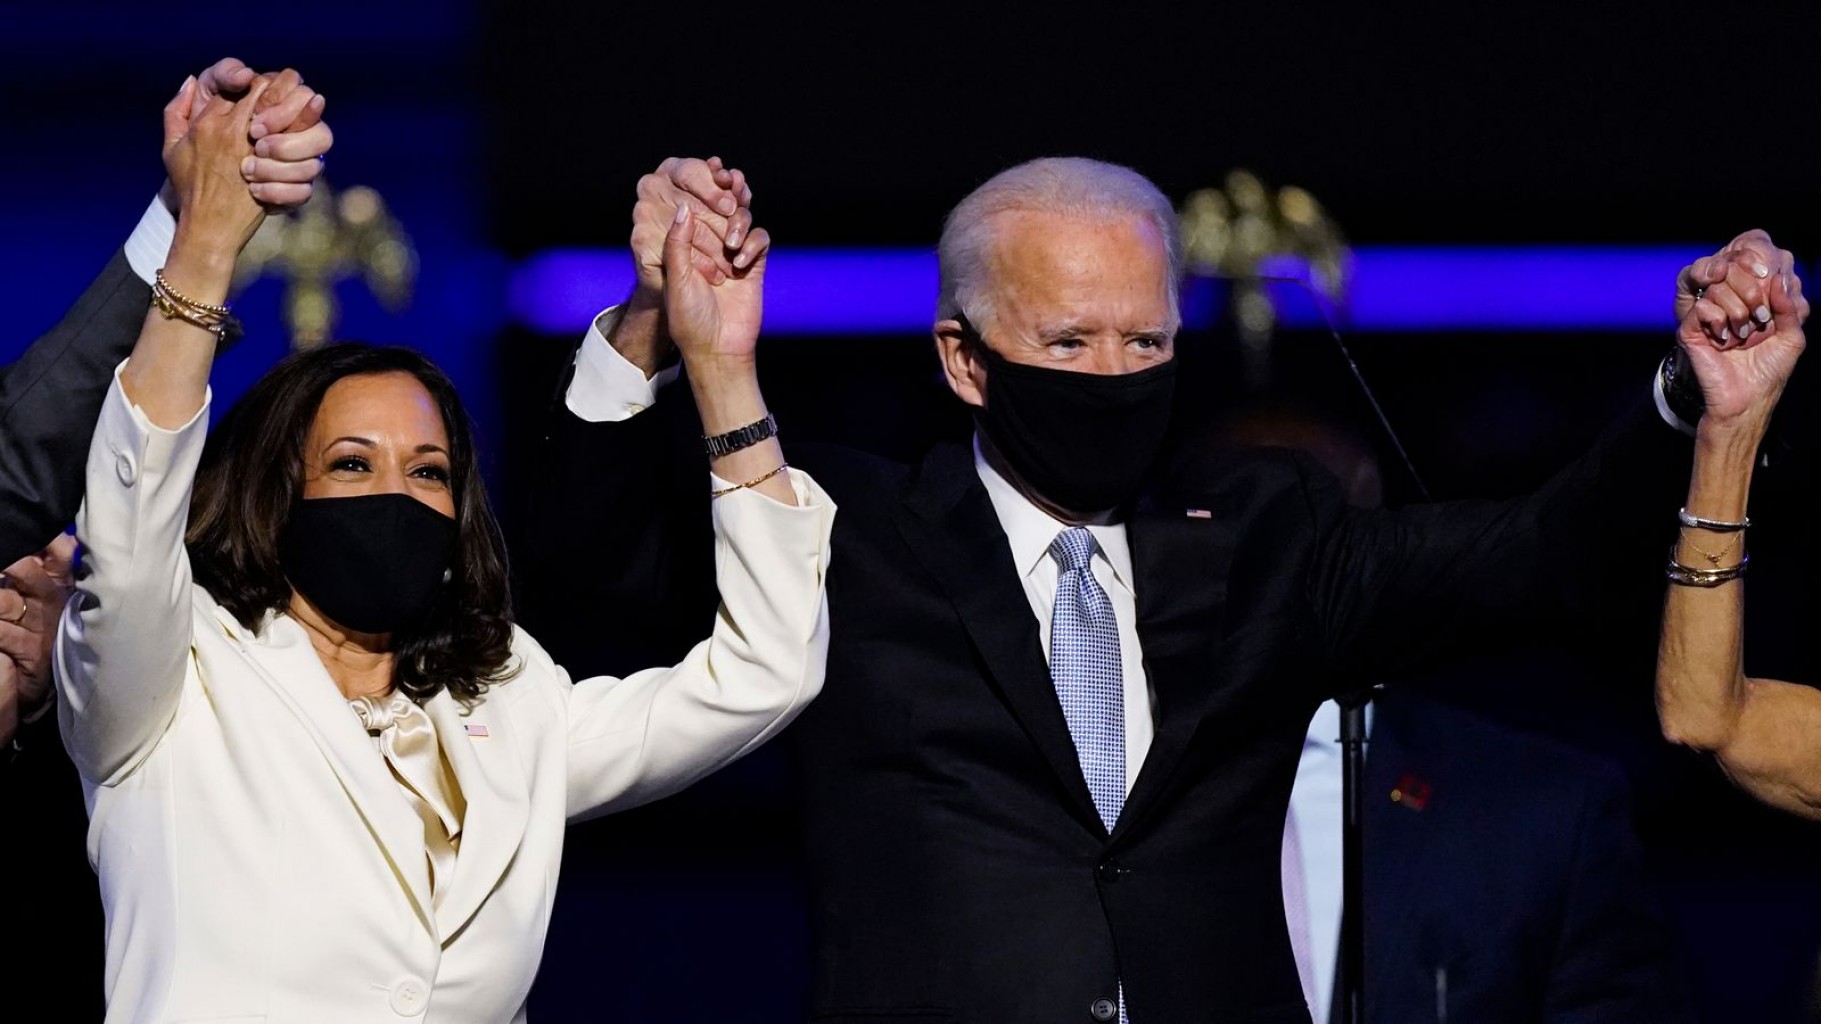 Collective Congratulations to the incoming Biden-Harris Administration